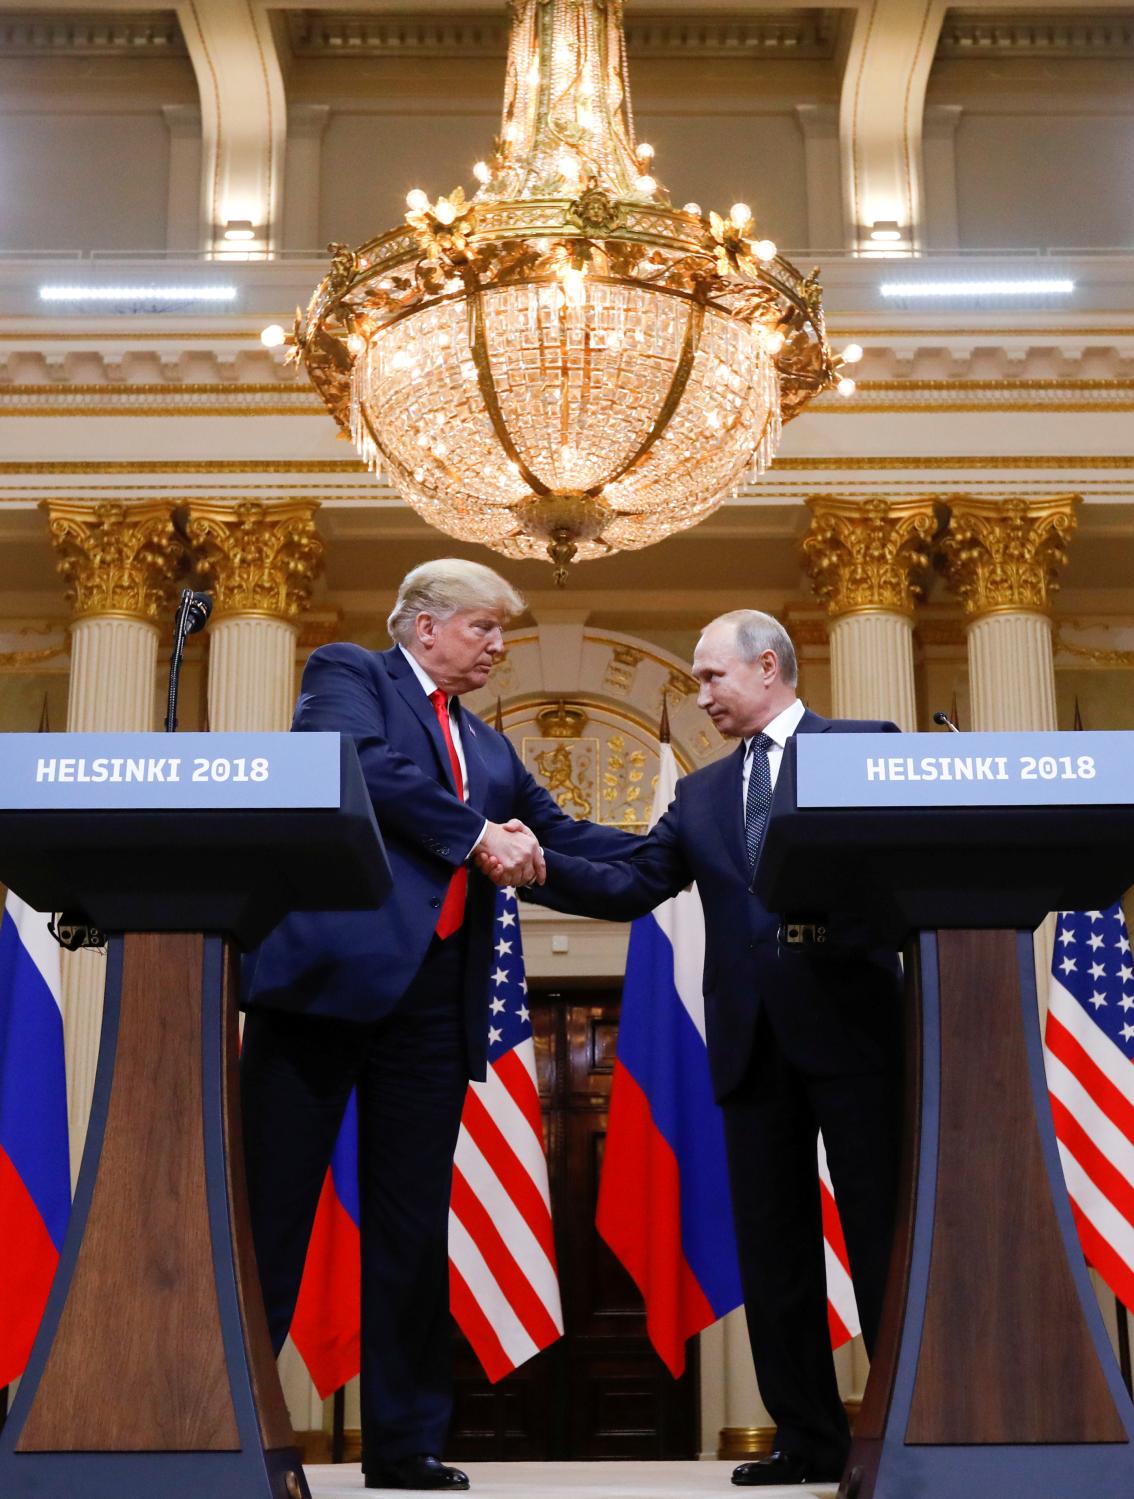 U.S. President Donald Trump and Russia's President Vladimir Putin shake hands during a joint news conference after their meeting in Helsinki, Finland, July 16, 2018. REUTERS/Kevin Lamarque - RC181F828BC0